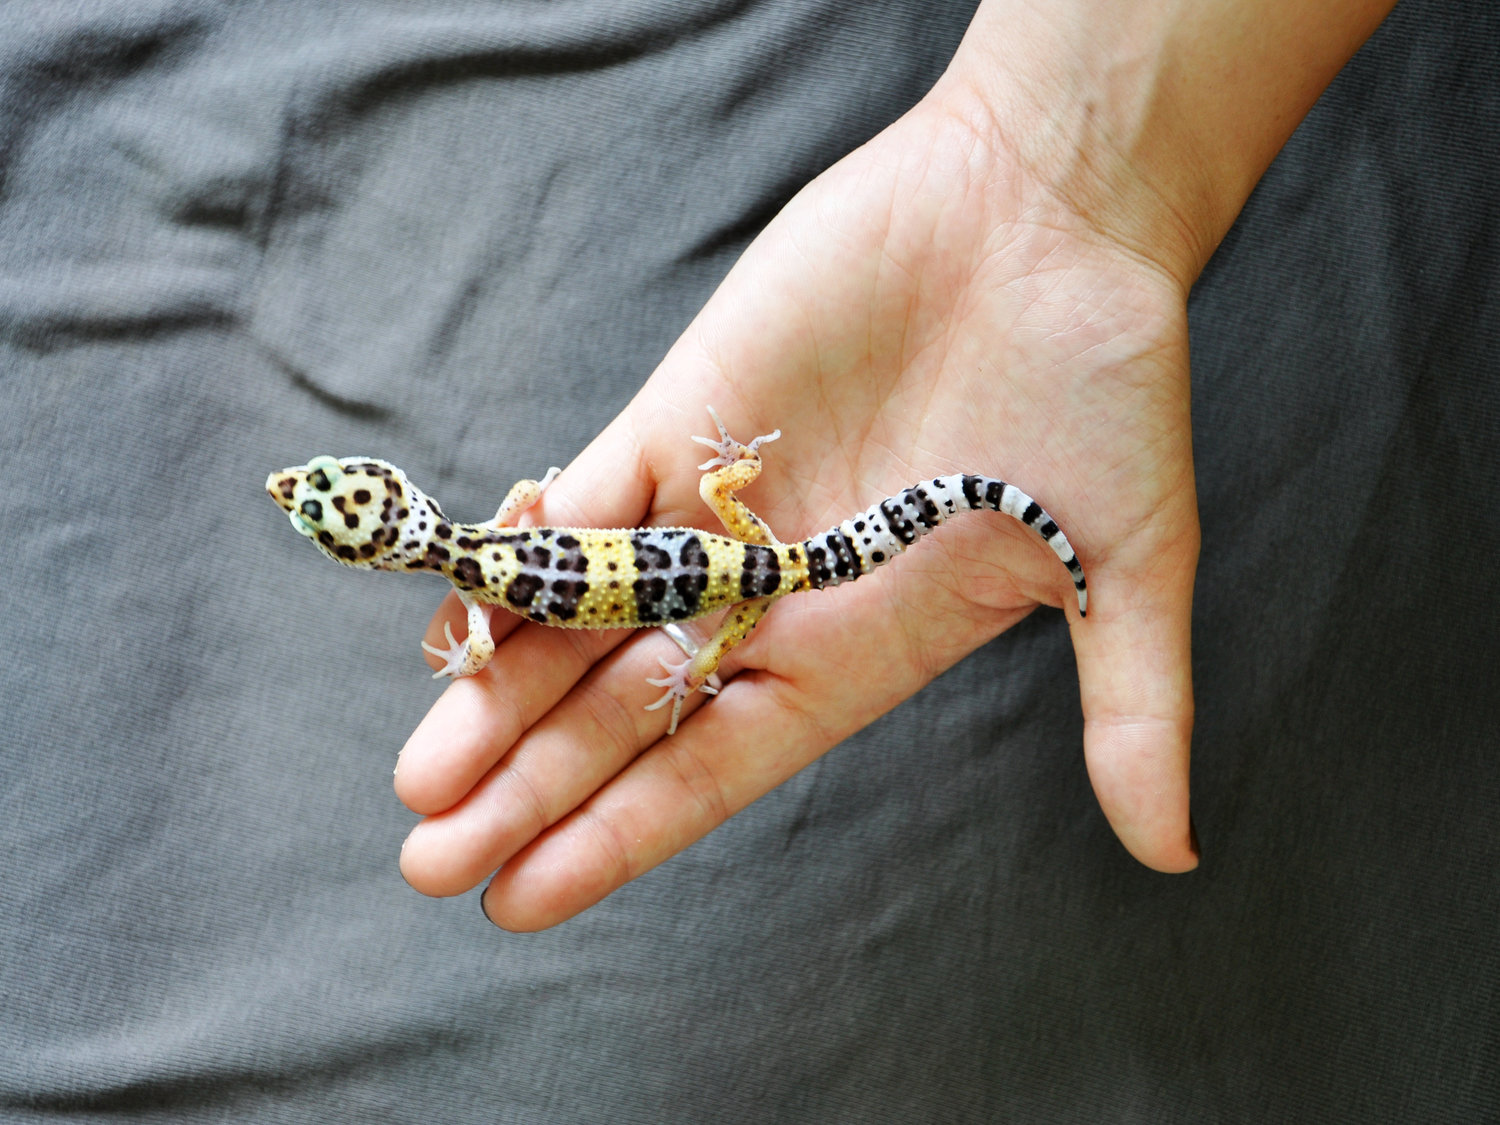 6 Tips to Get Your Leopard Gecko to Trust You